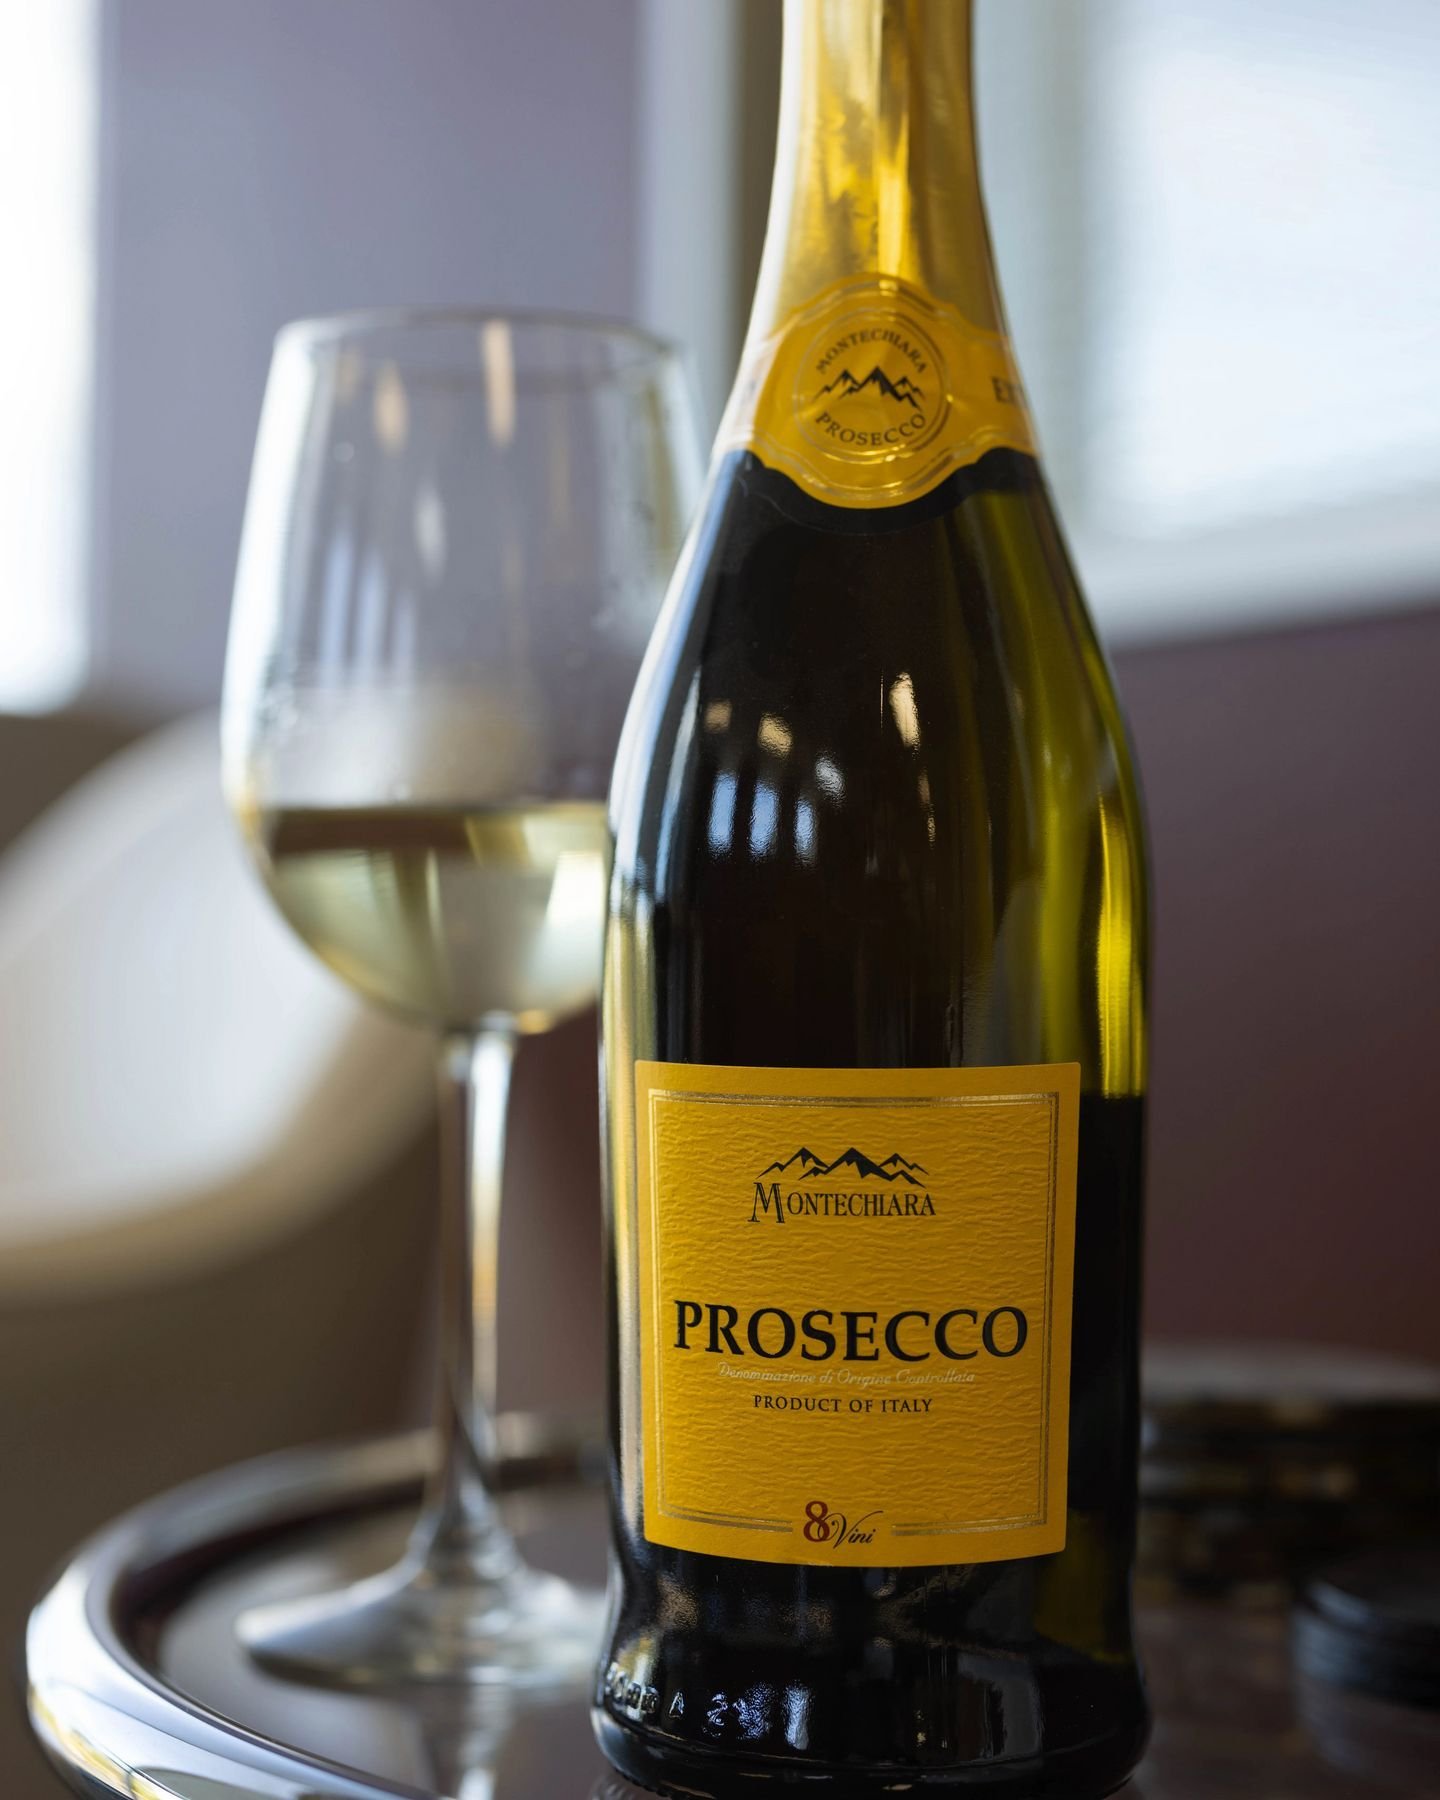 🍷 Revel in the delightful pleasure of a glass of Montechiara Prosecco during this beautiful picnic season. This wine, rich with floral aromas and hints of apple skin and pear, promises a unique sipping experience. 
. 
🍾 You only need a bottle of Mo